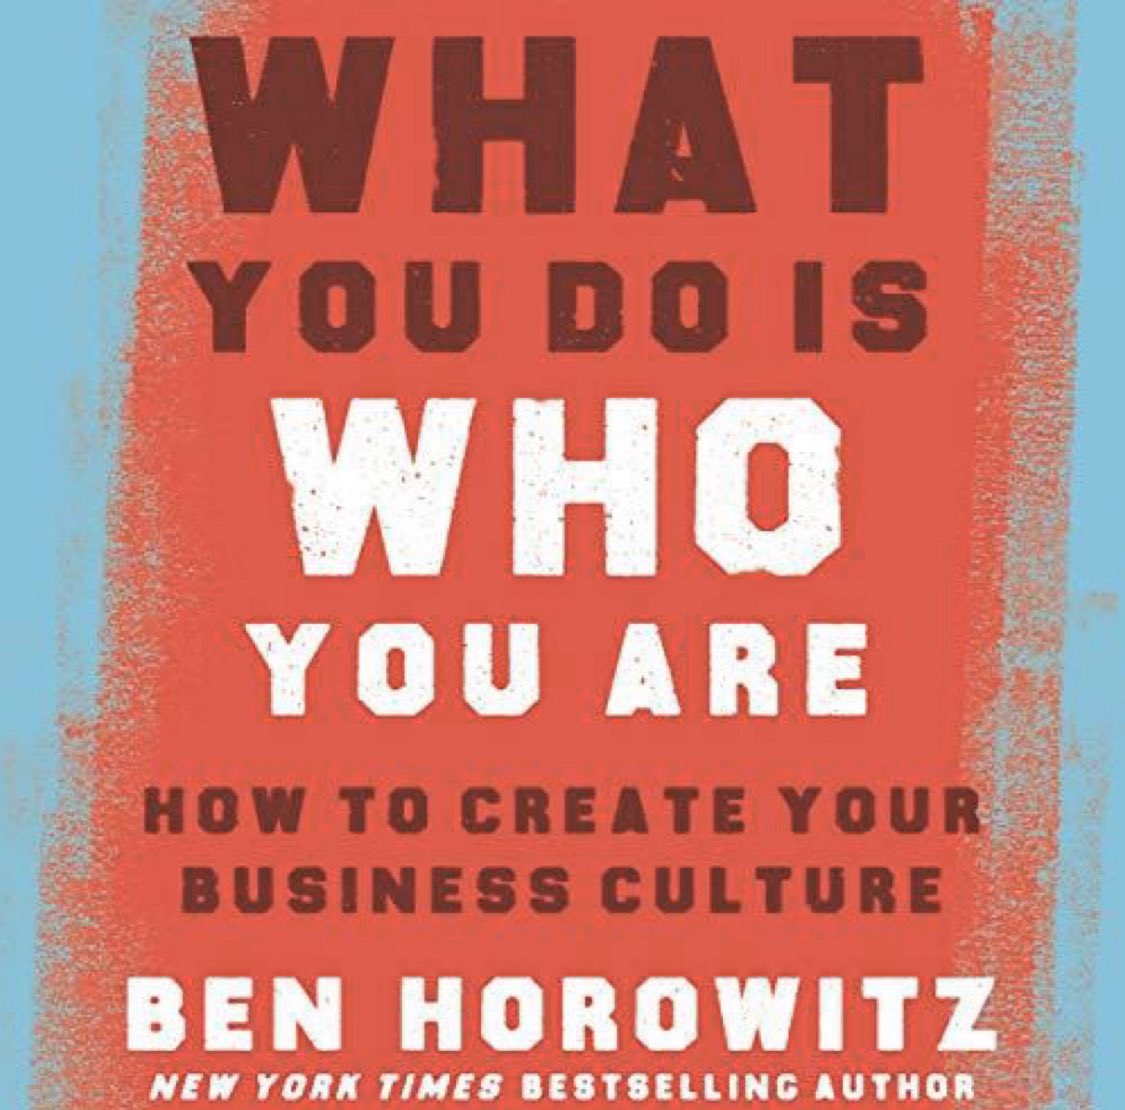 Book 42Lessons:Your culture is the set of norms that shape people’s decision-making when you aren’t around. Cultivate the virtues that you can embody and follow, and don’t let ethical principles go unsaid.